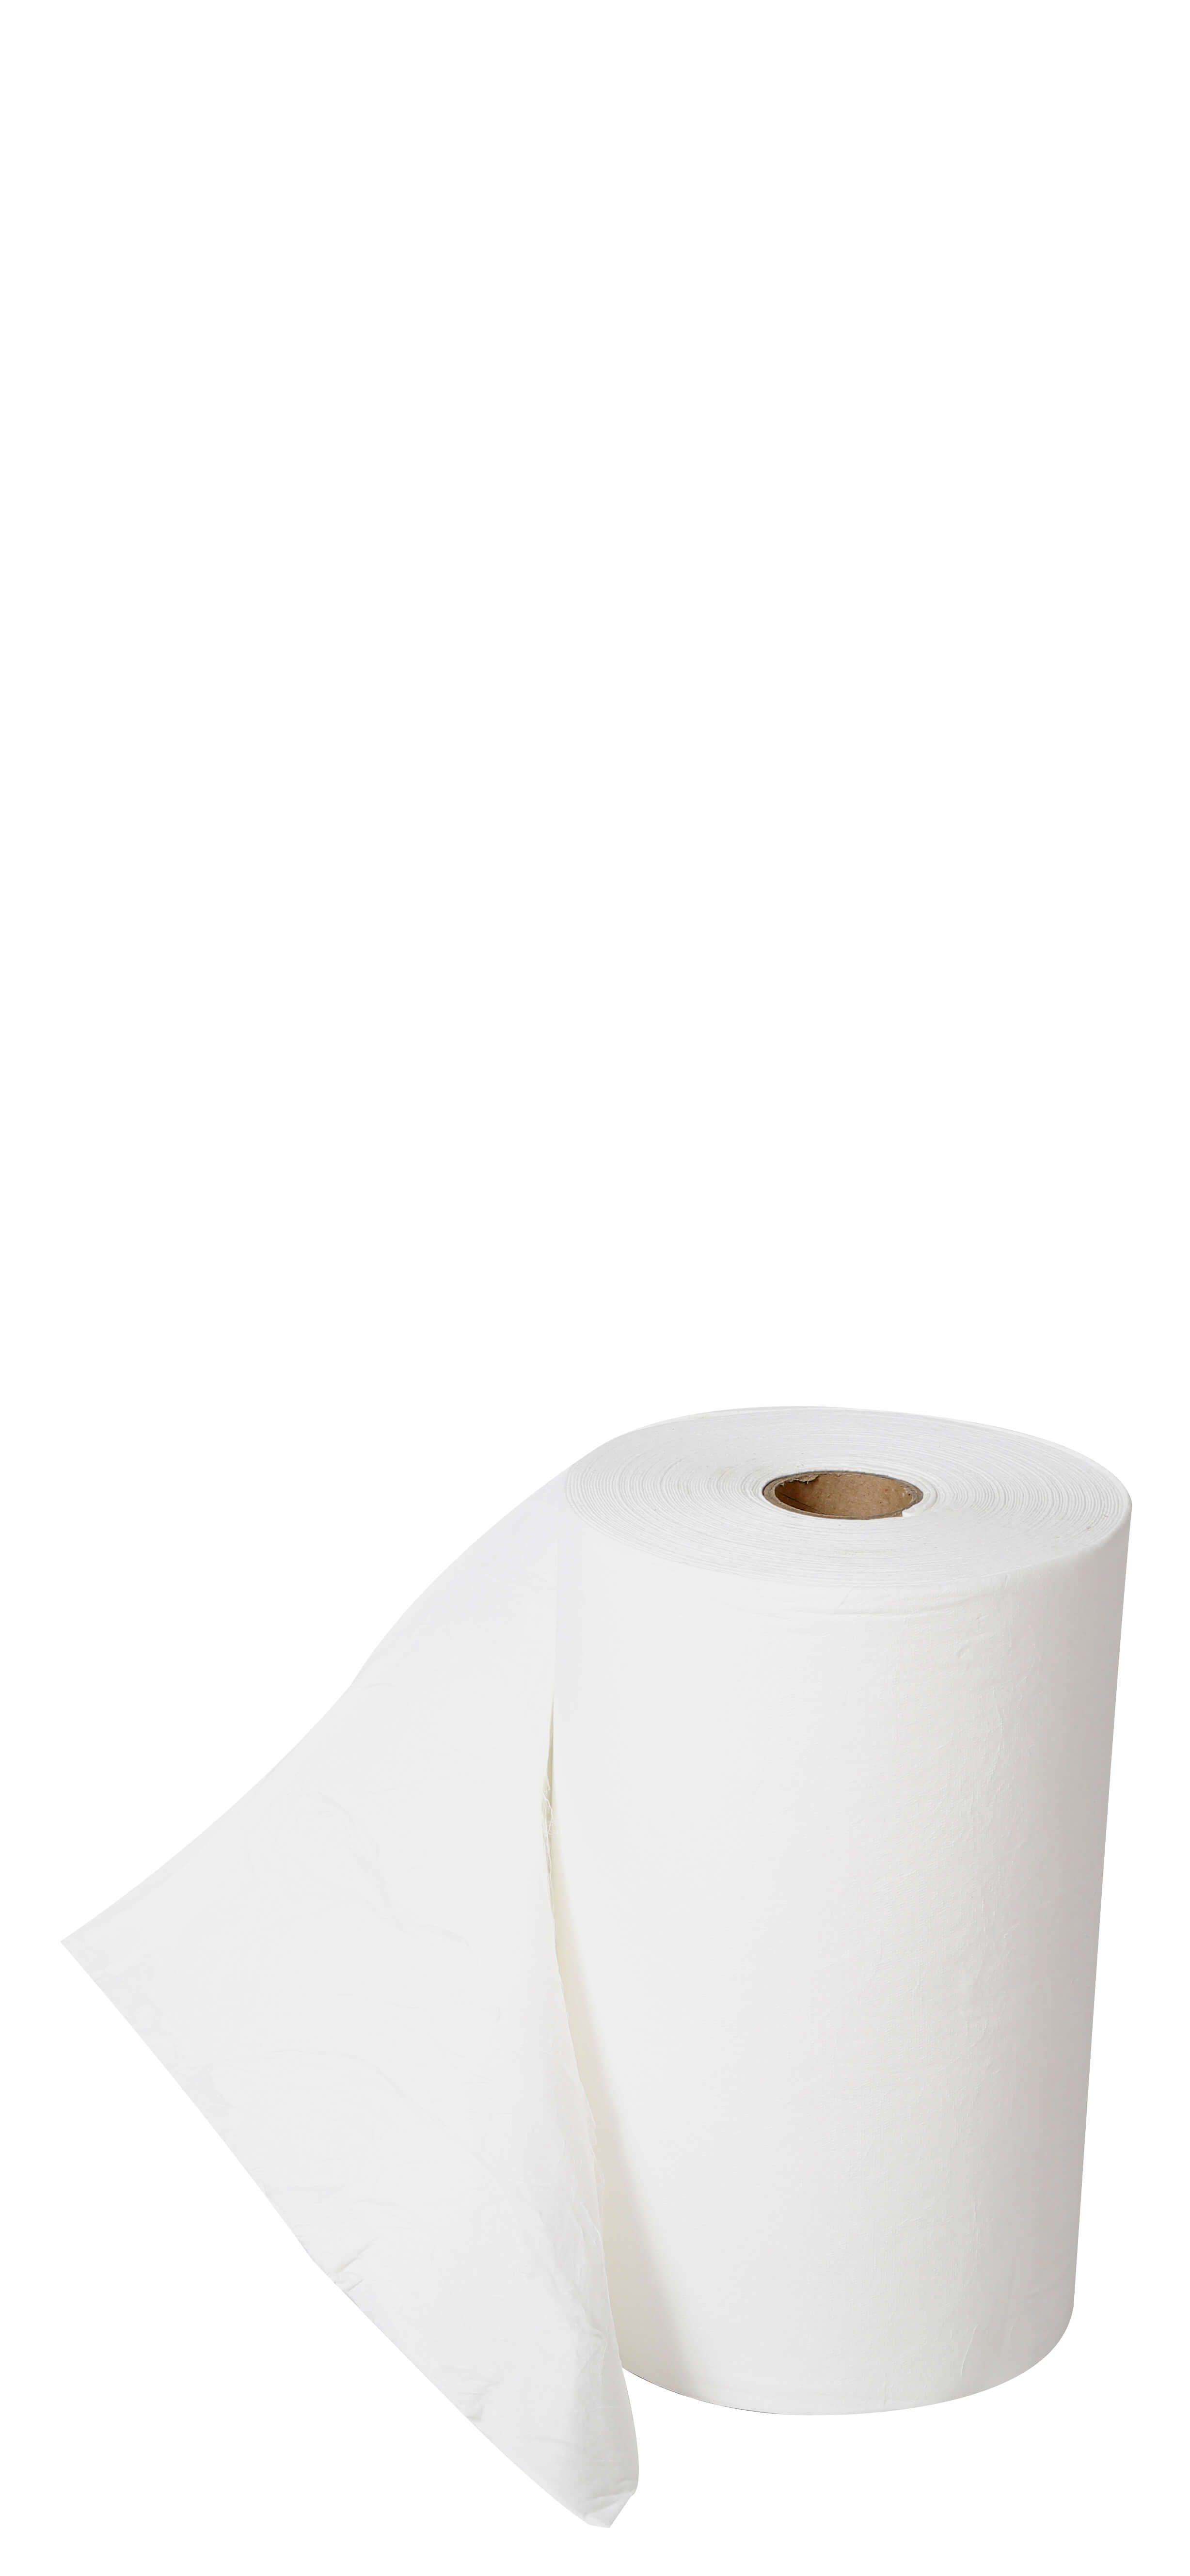 Premium-Weight Hydraulic Absorbent Roll 48cm x 40M, Polywrapped 